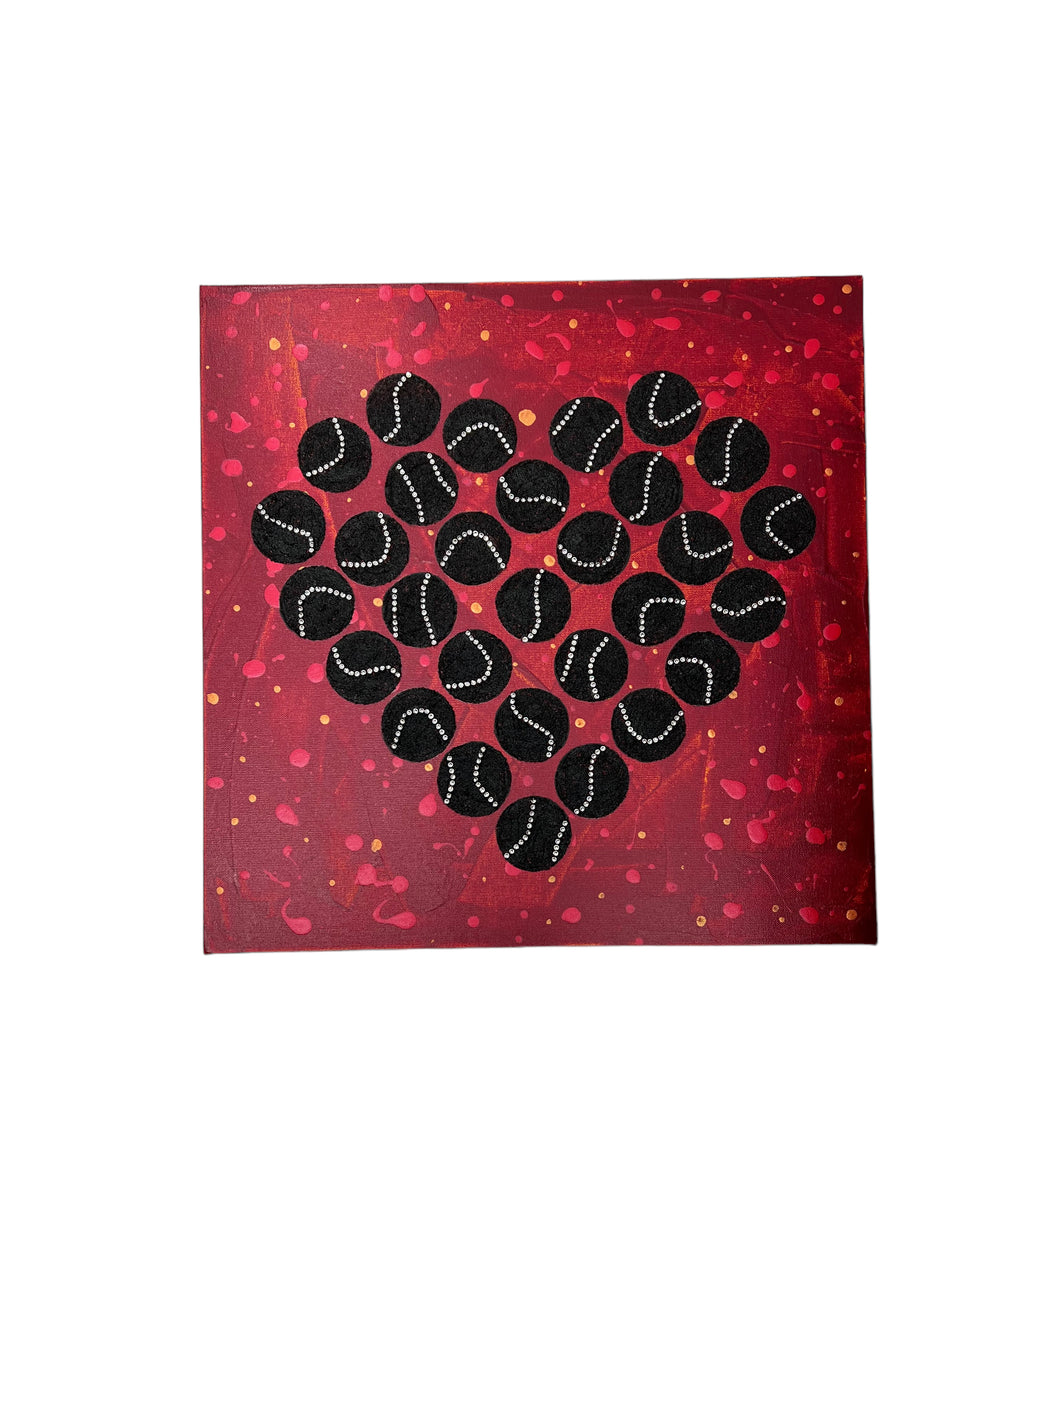 In Love With Tennis - Black Tennis Balls in Heart Shape Wall Art On Red